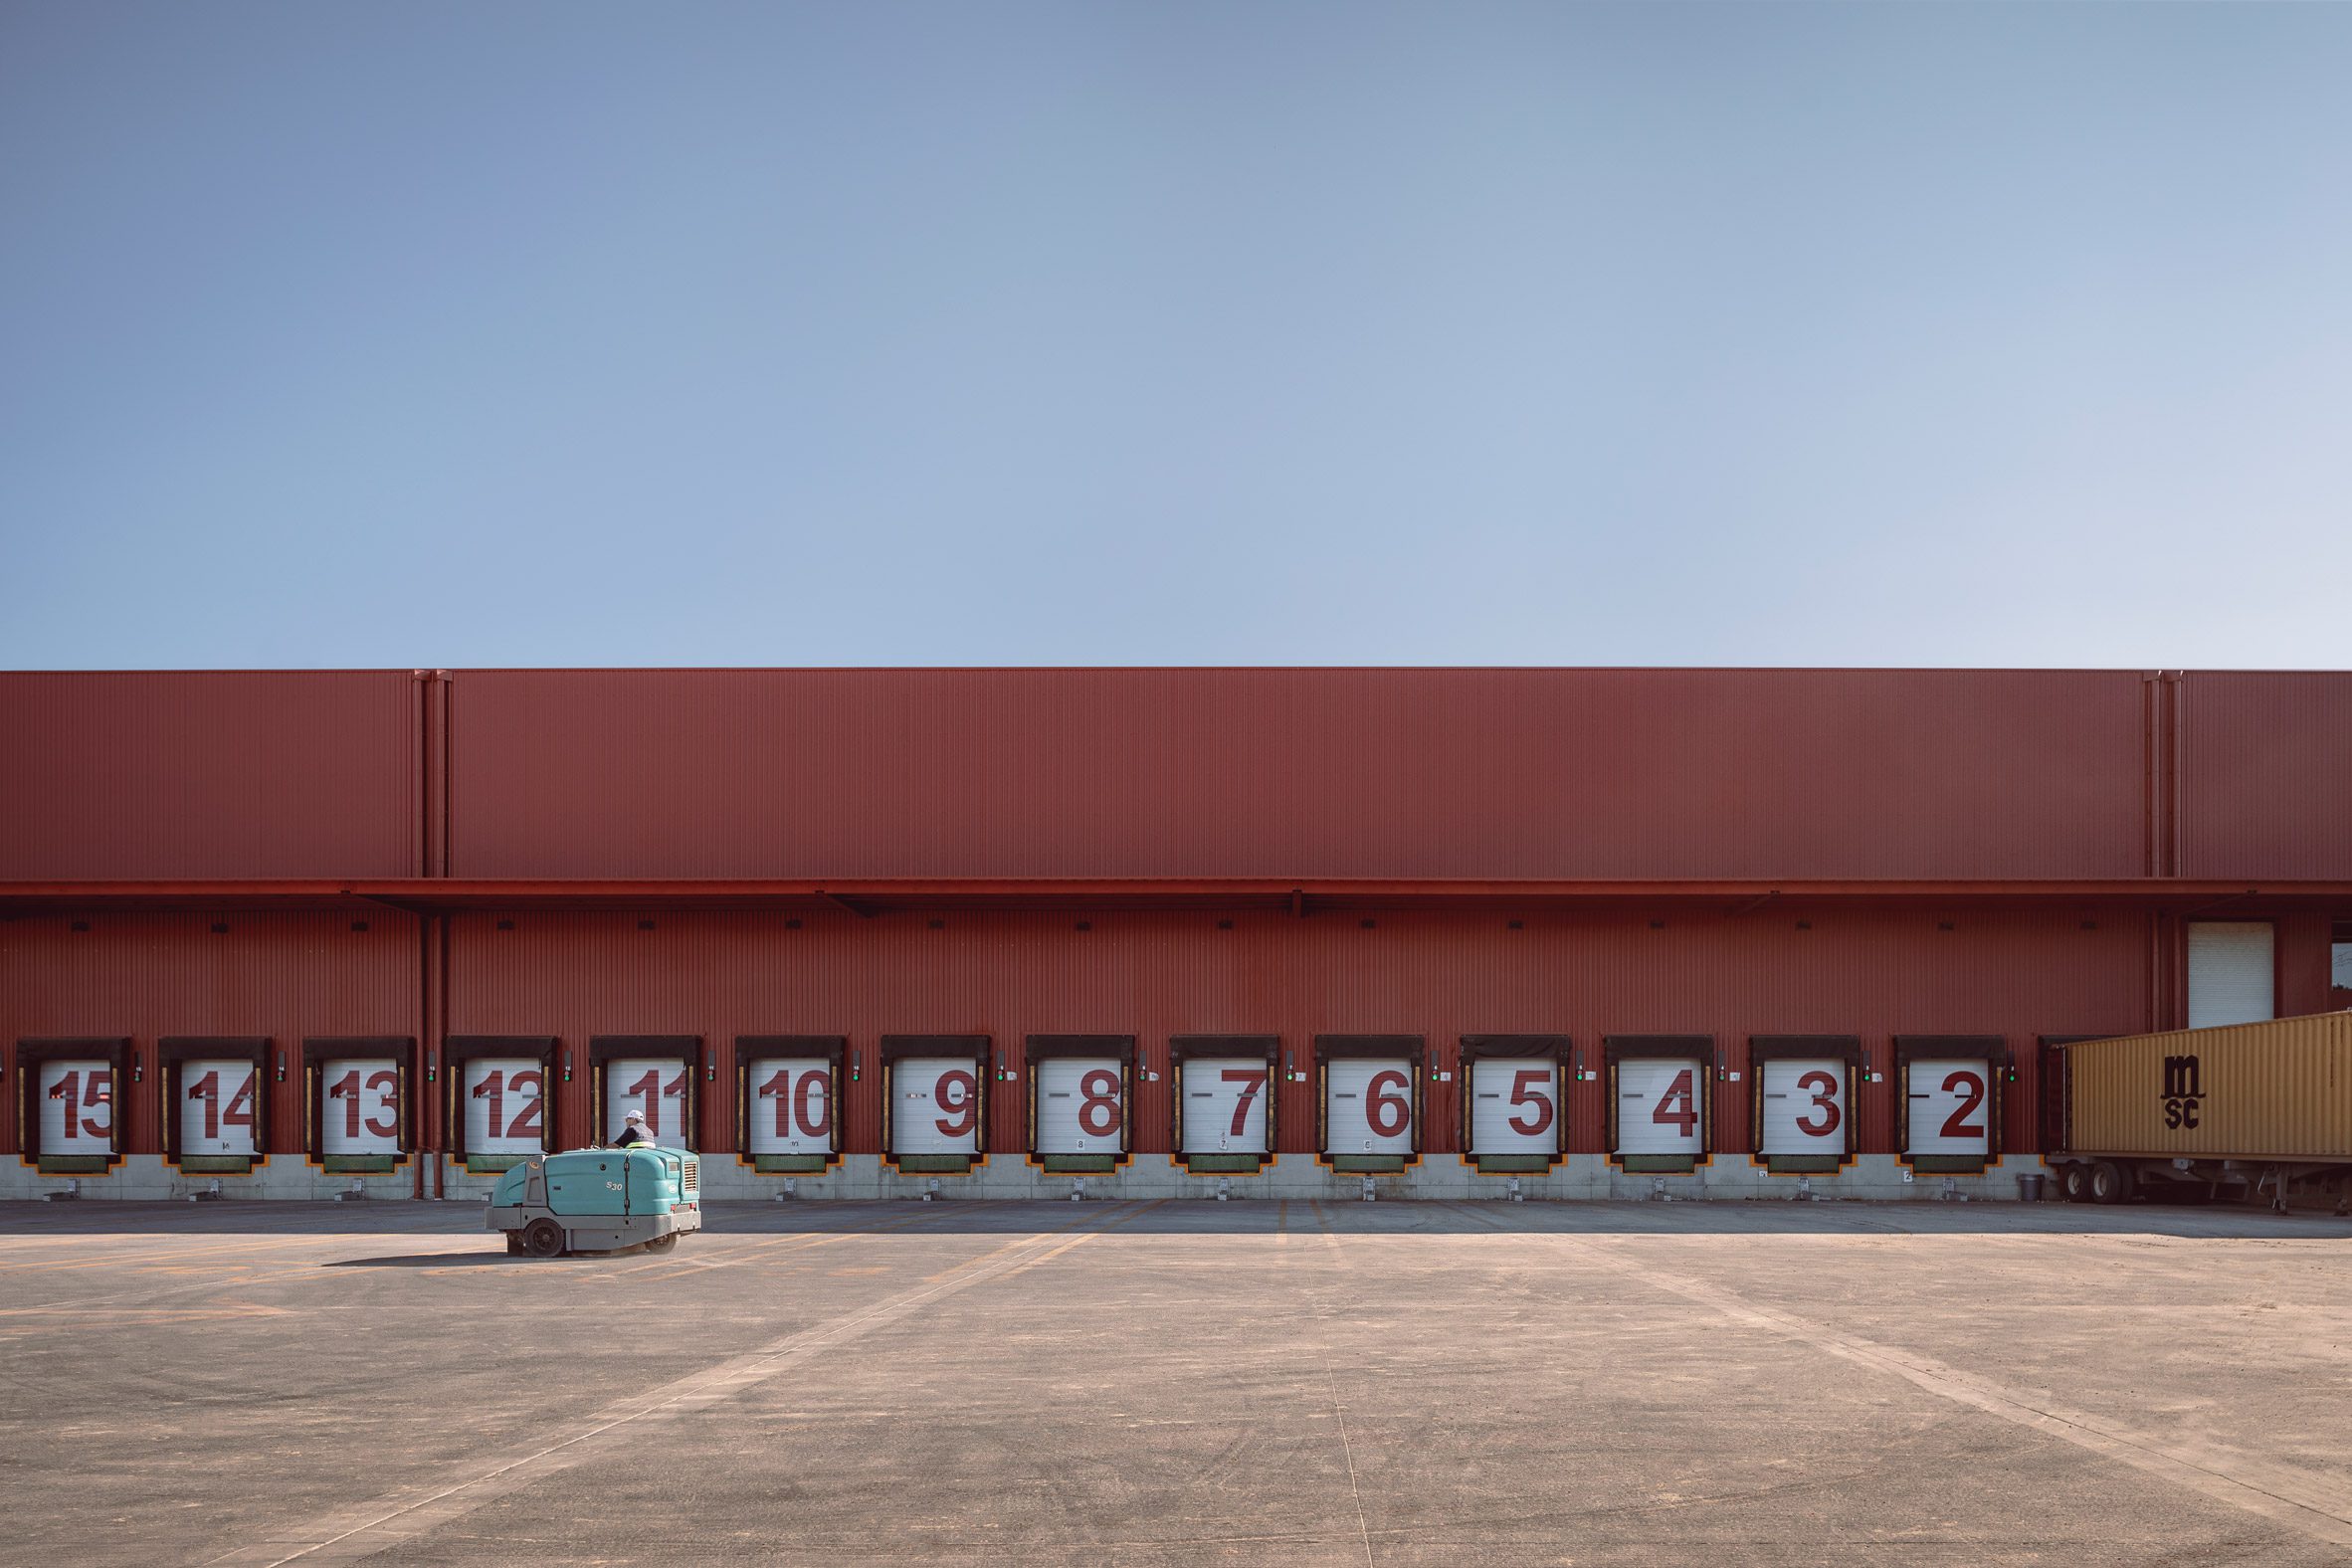 Warehouses with large numbers delineating their spaces at crimson-red building for Betterware